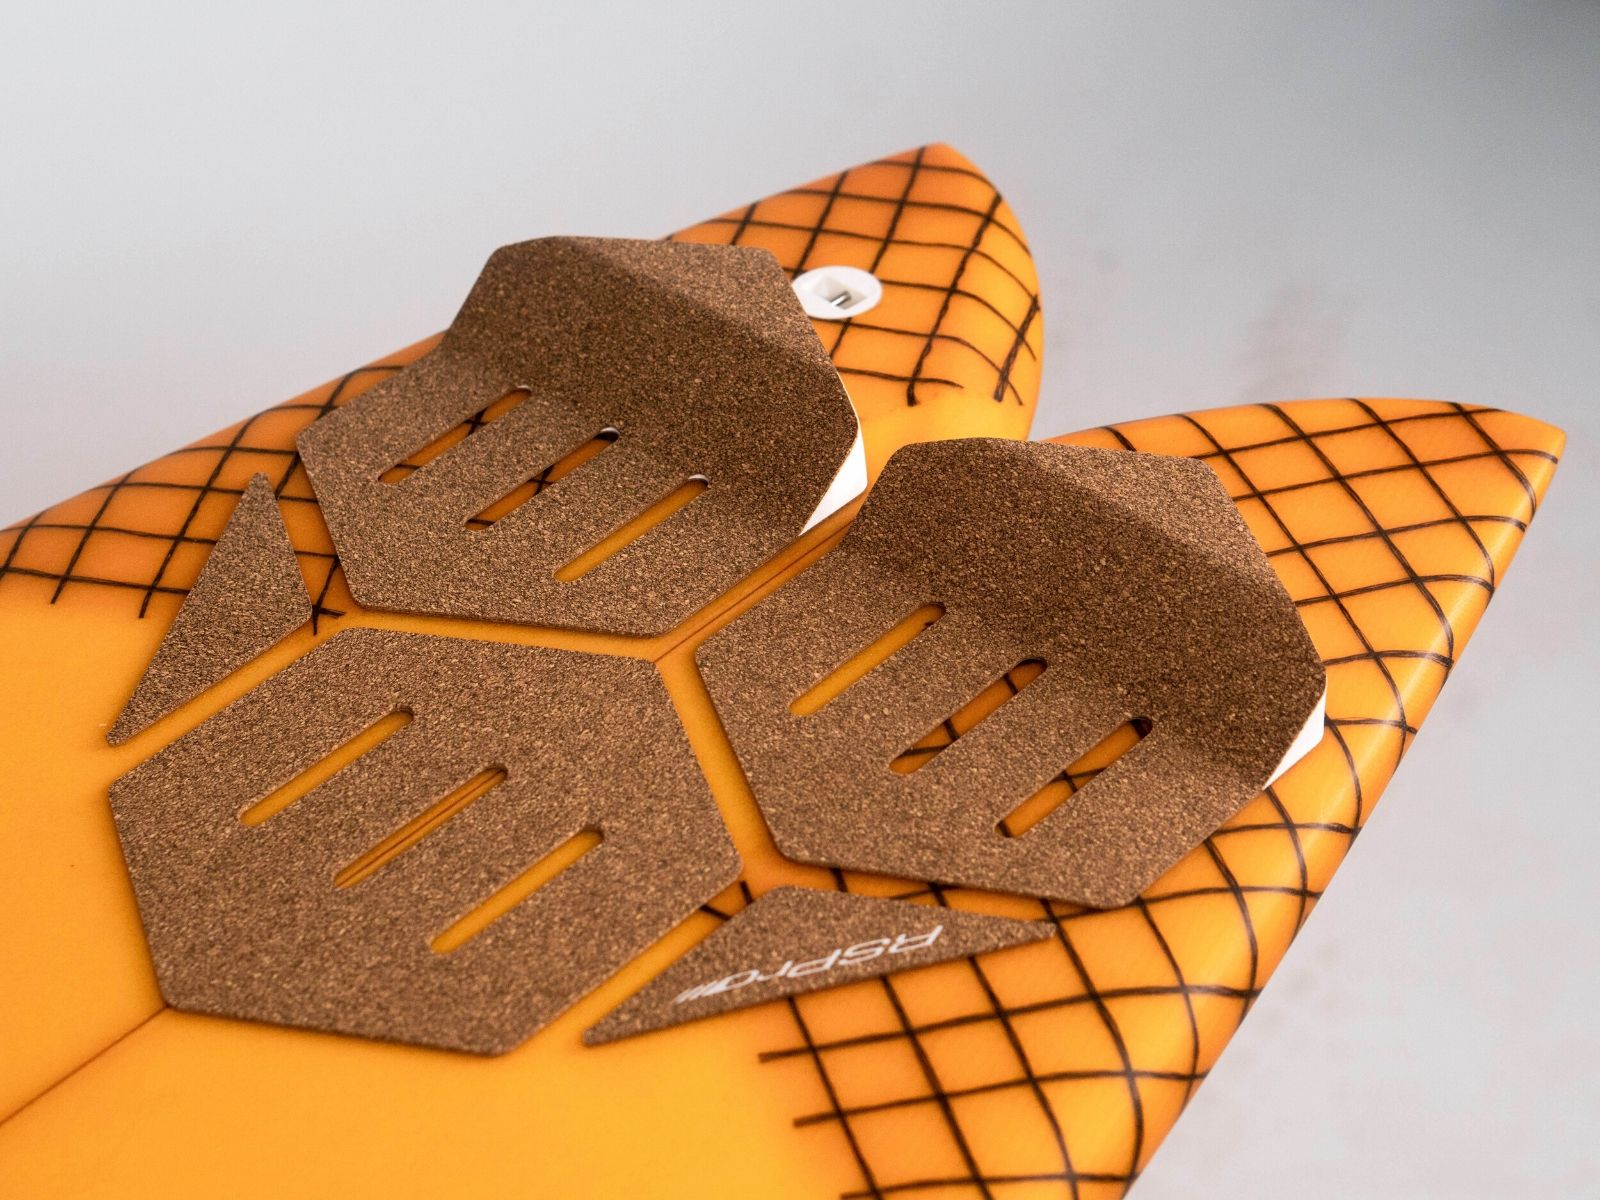 RSPro wid cork tail pad for surfboards - eco-friendly wax alternative.